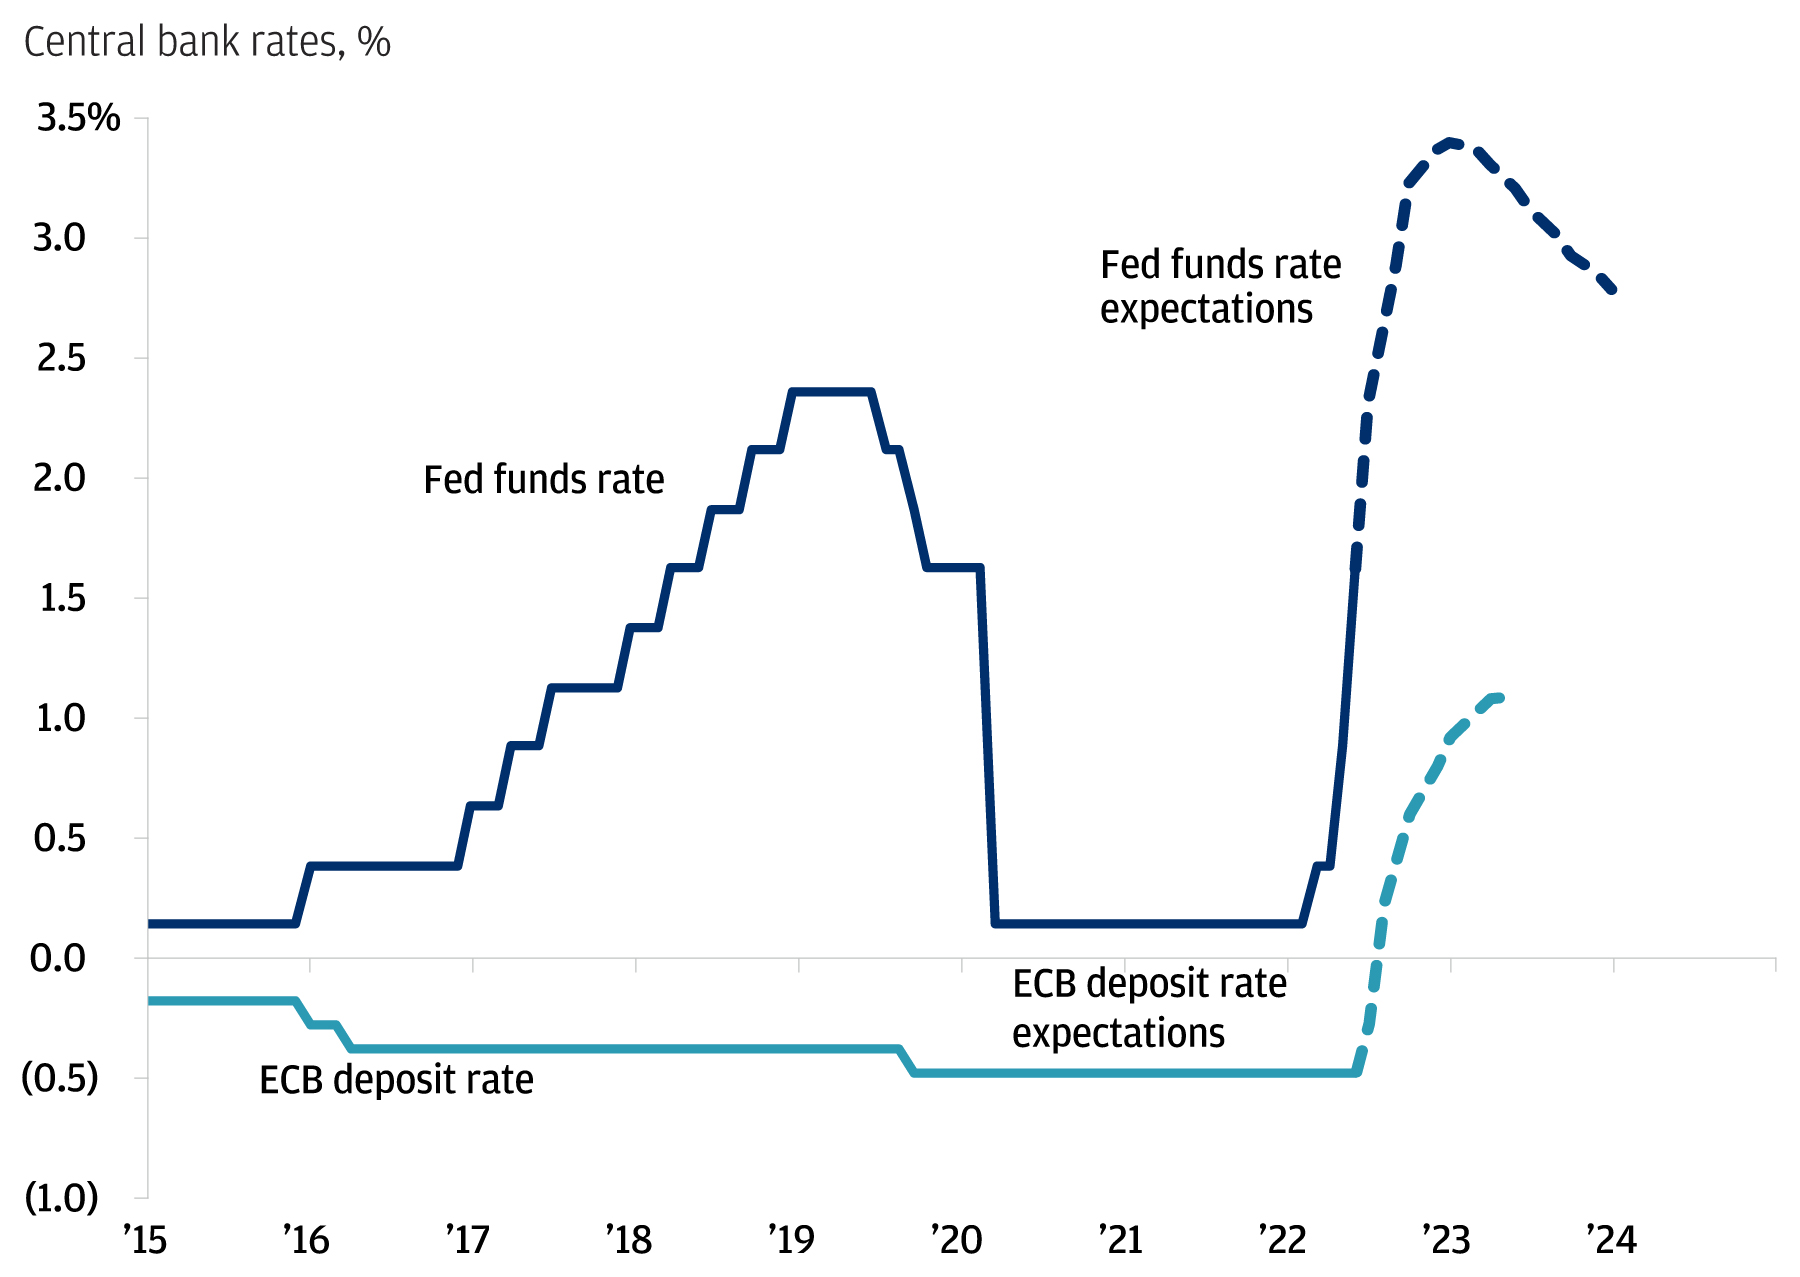 This chart shows the Fed funds rate and ECB deposit rate from 2015 to 2022, and shows the expected rate hikes heading into 2024.